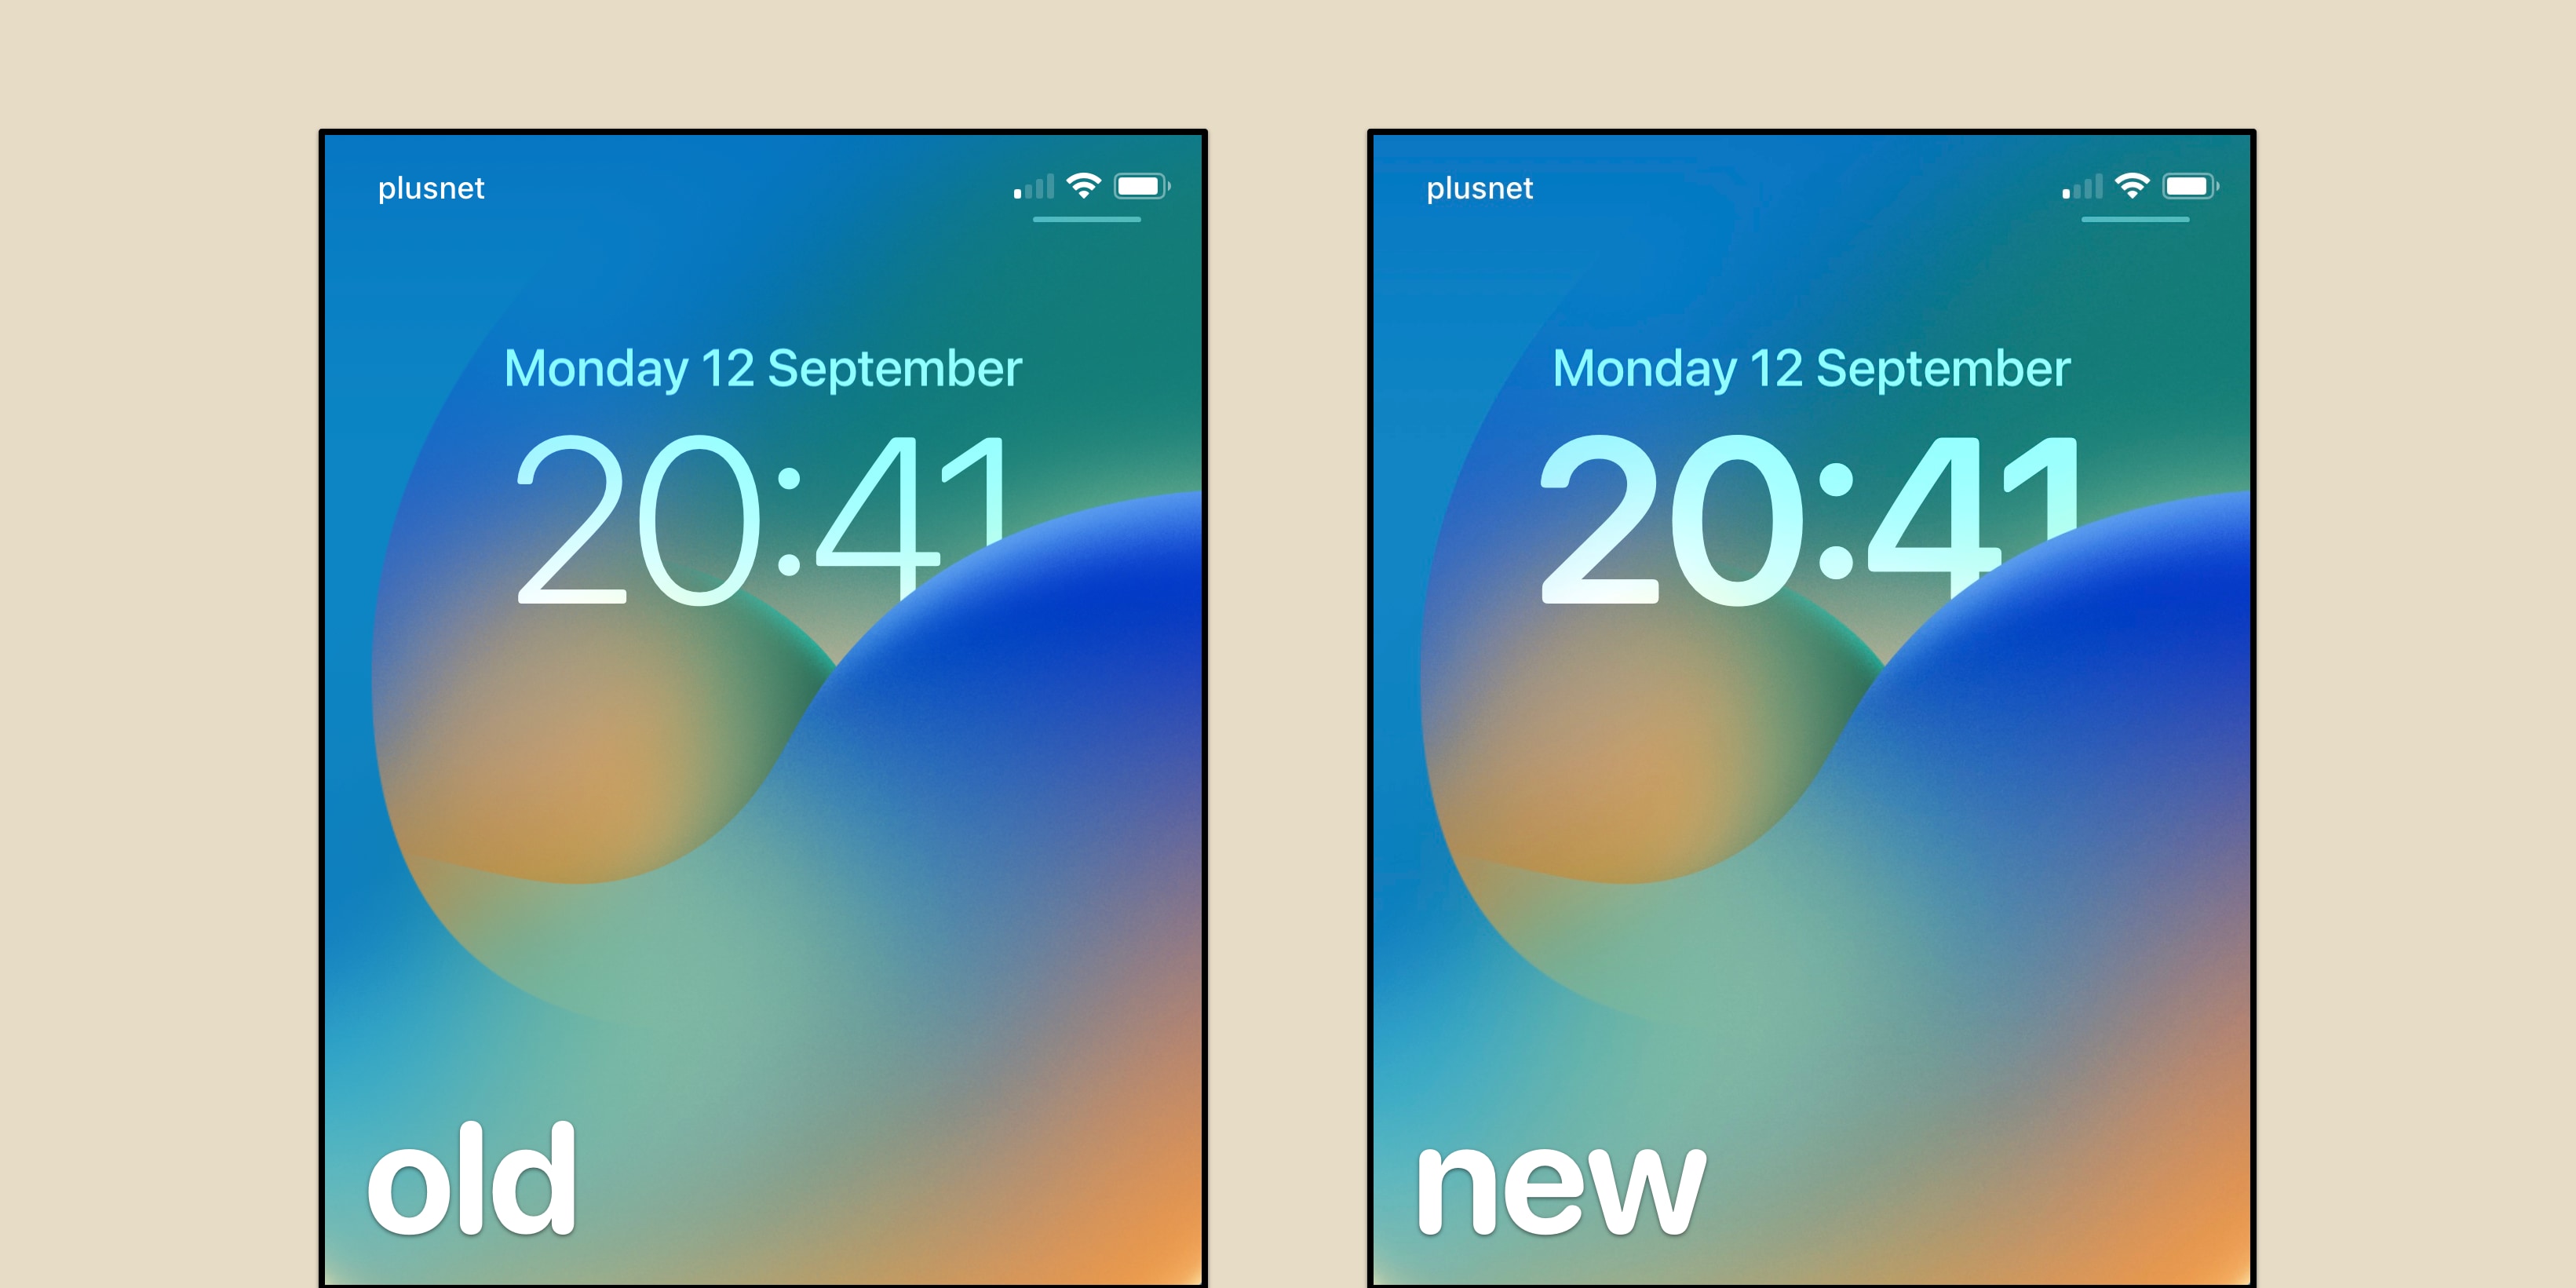 How to change iPhone time font on the iOS 16 lock screen